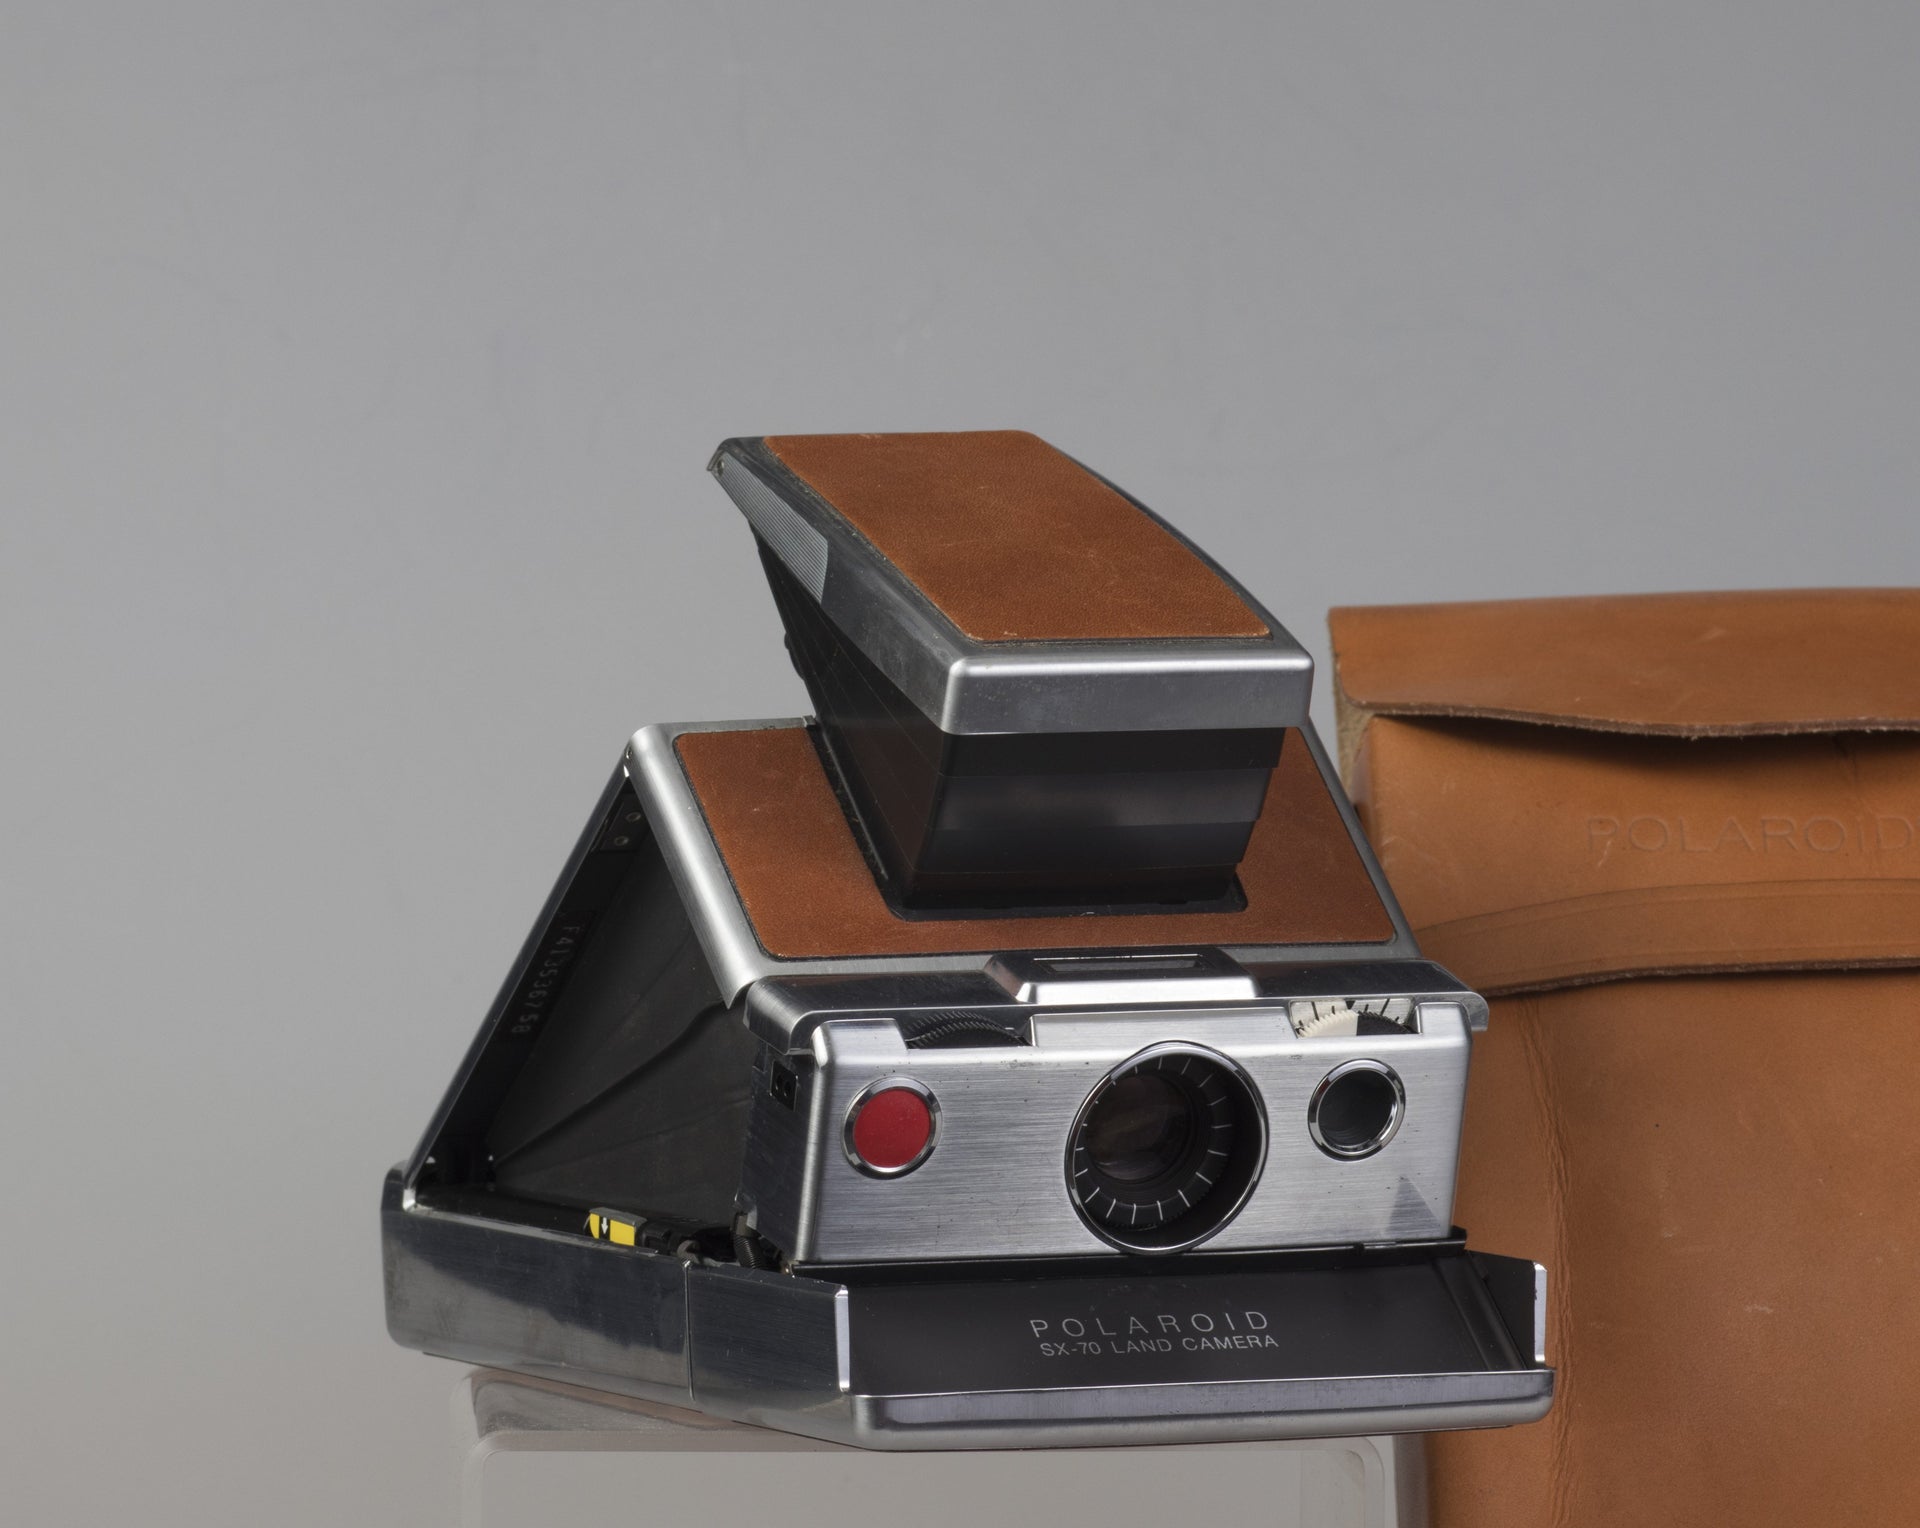 The Polaroid SX-70 - A Review of the Instant and Timeless Classic